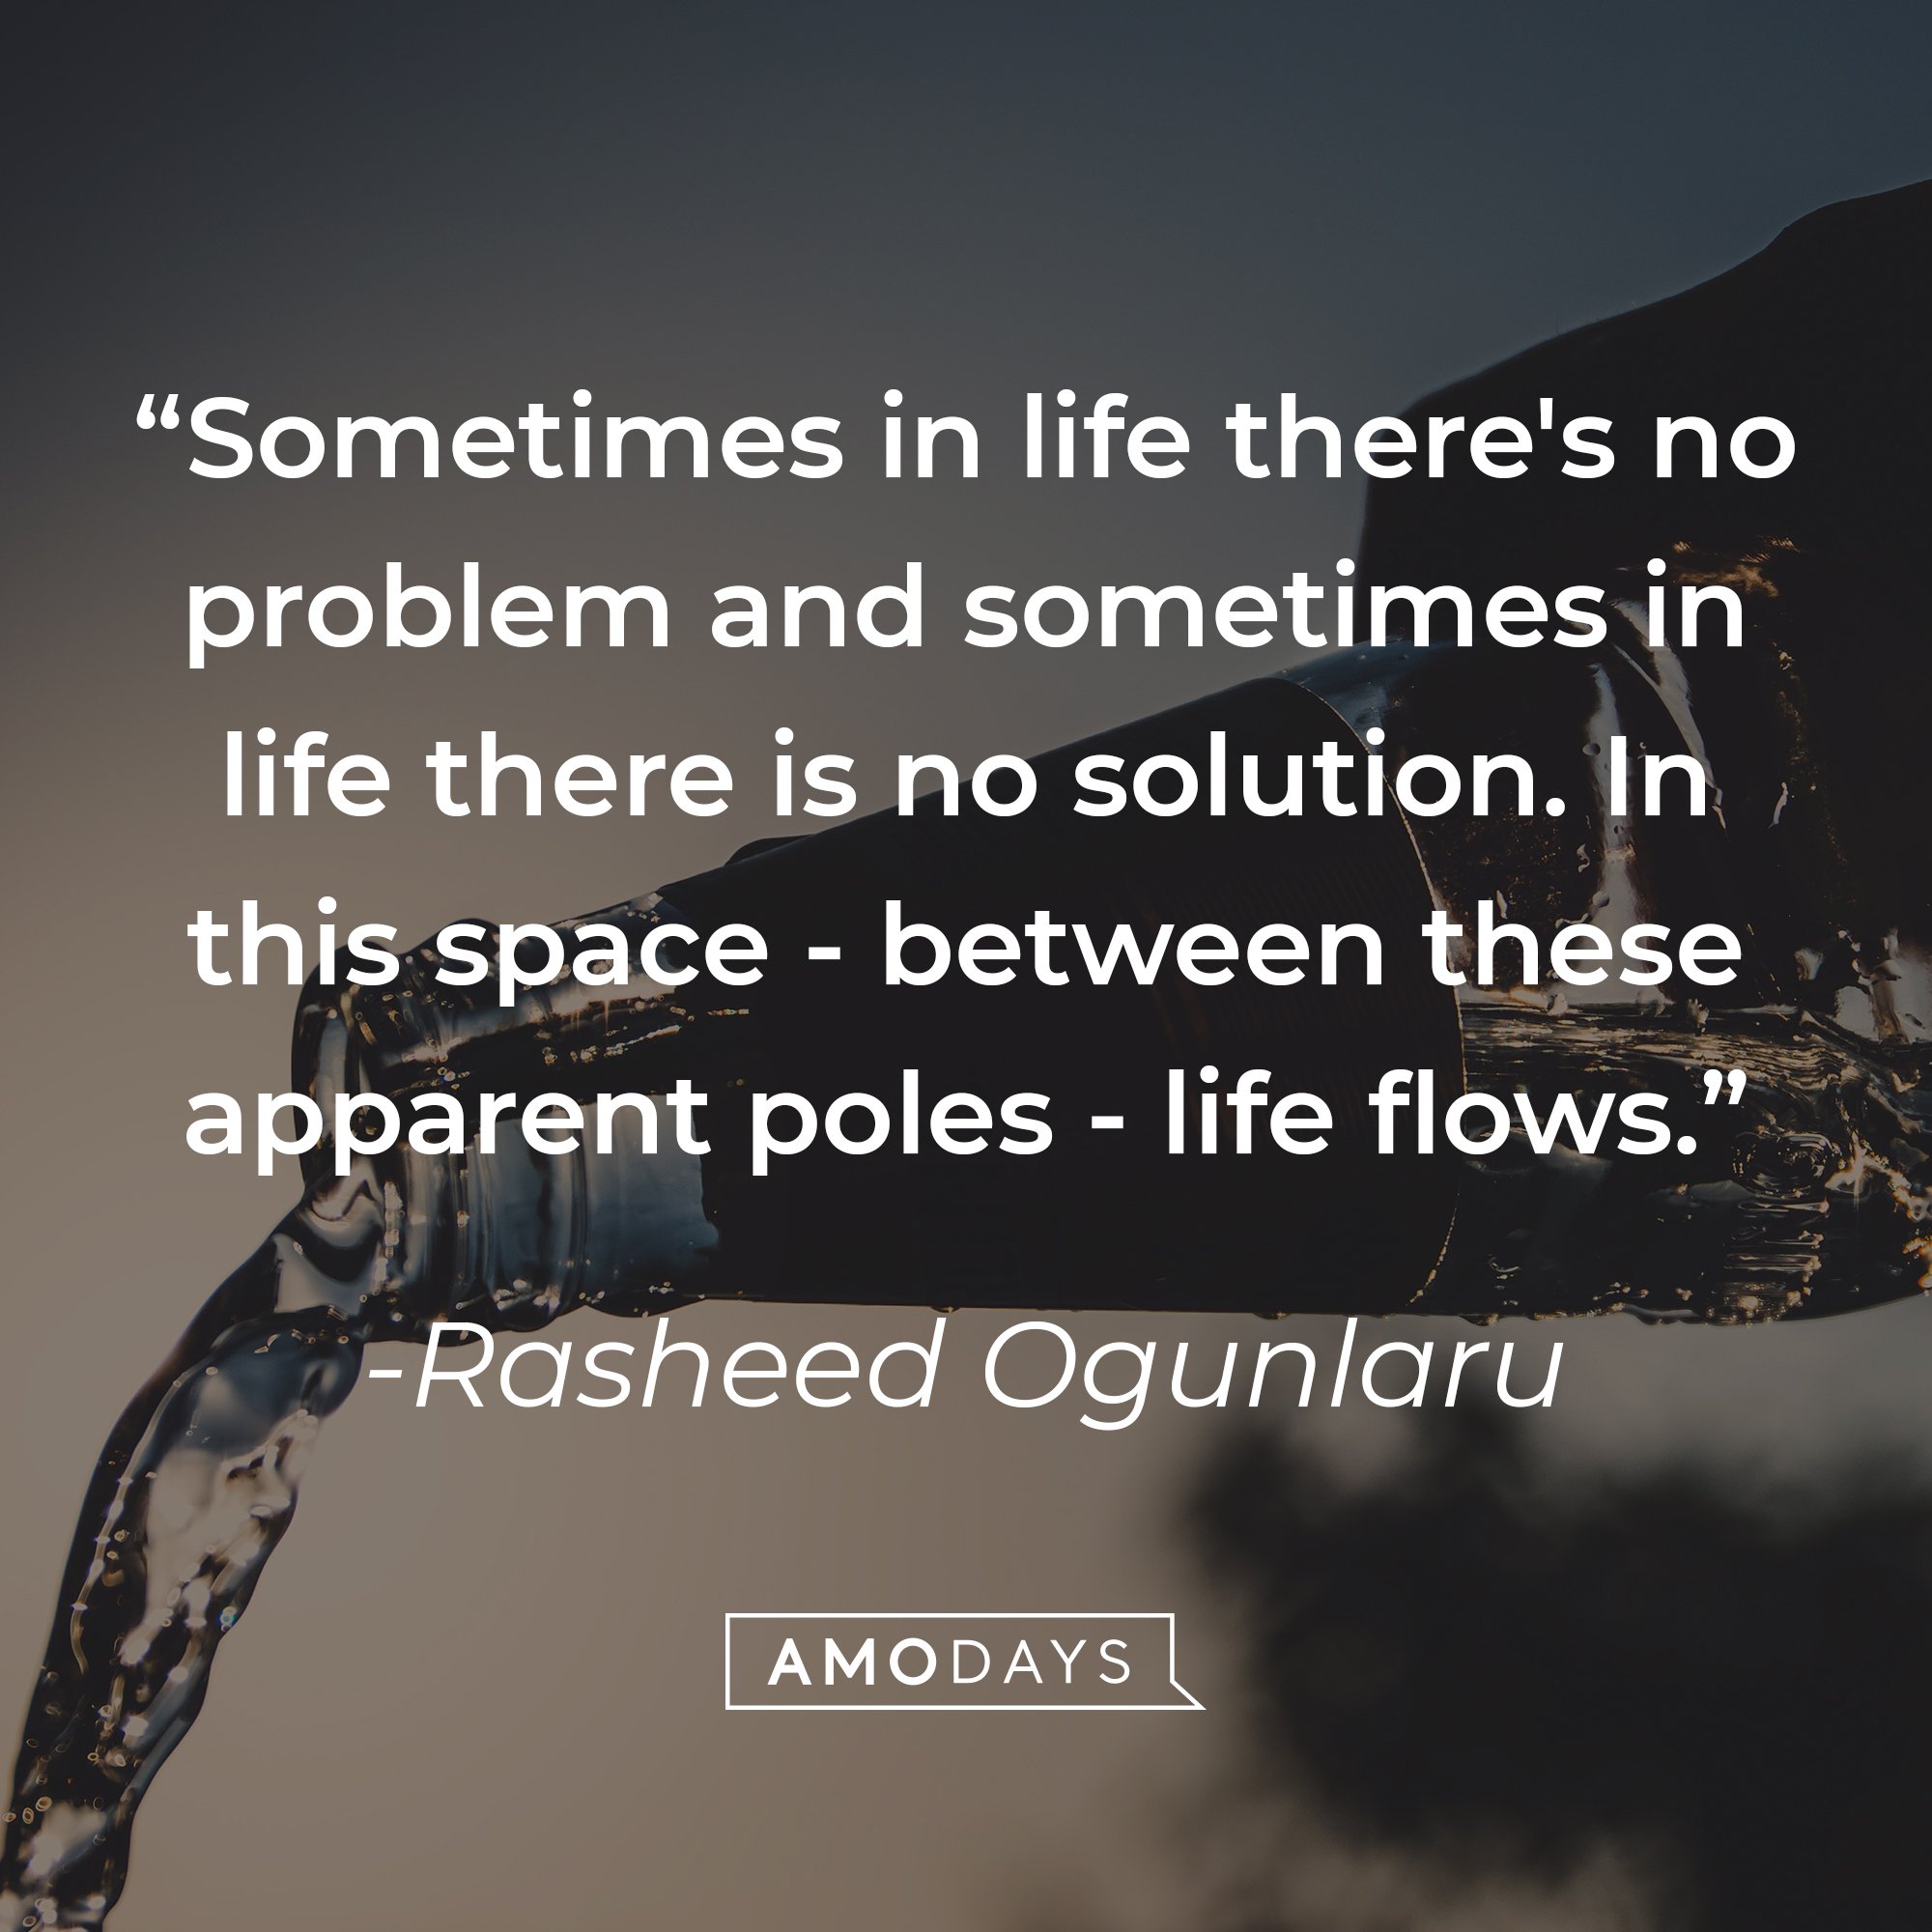 Rasheed Ogunlaru's quote: "Sometimes in life there's no problem and sometimes in life there is no solution. In this space - between these apparent poles - life flows." | Image: AmoDays